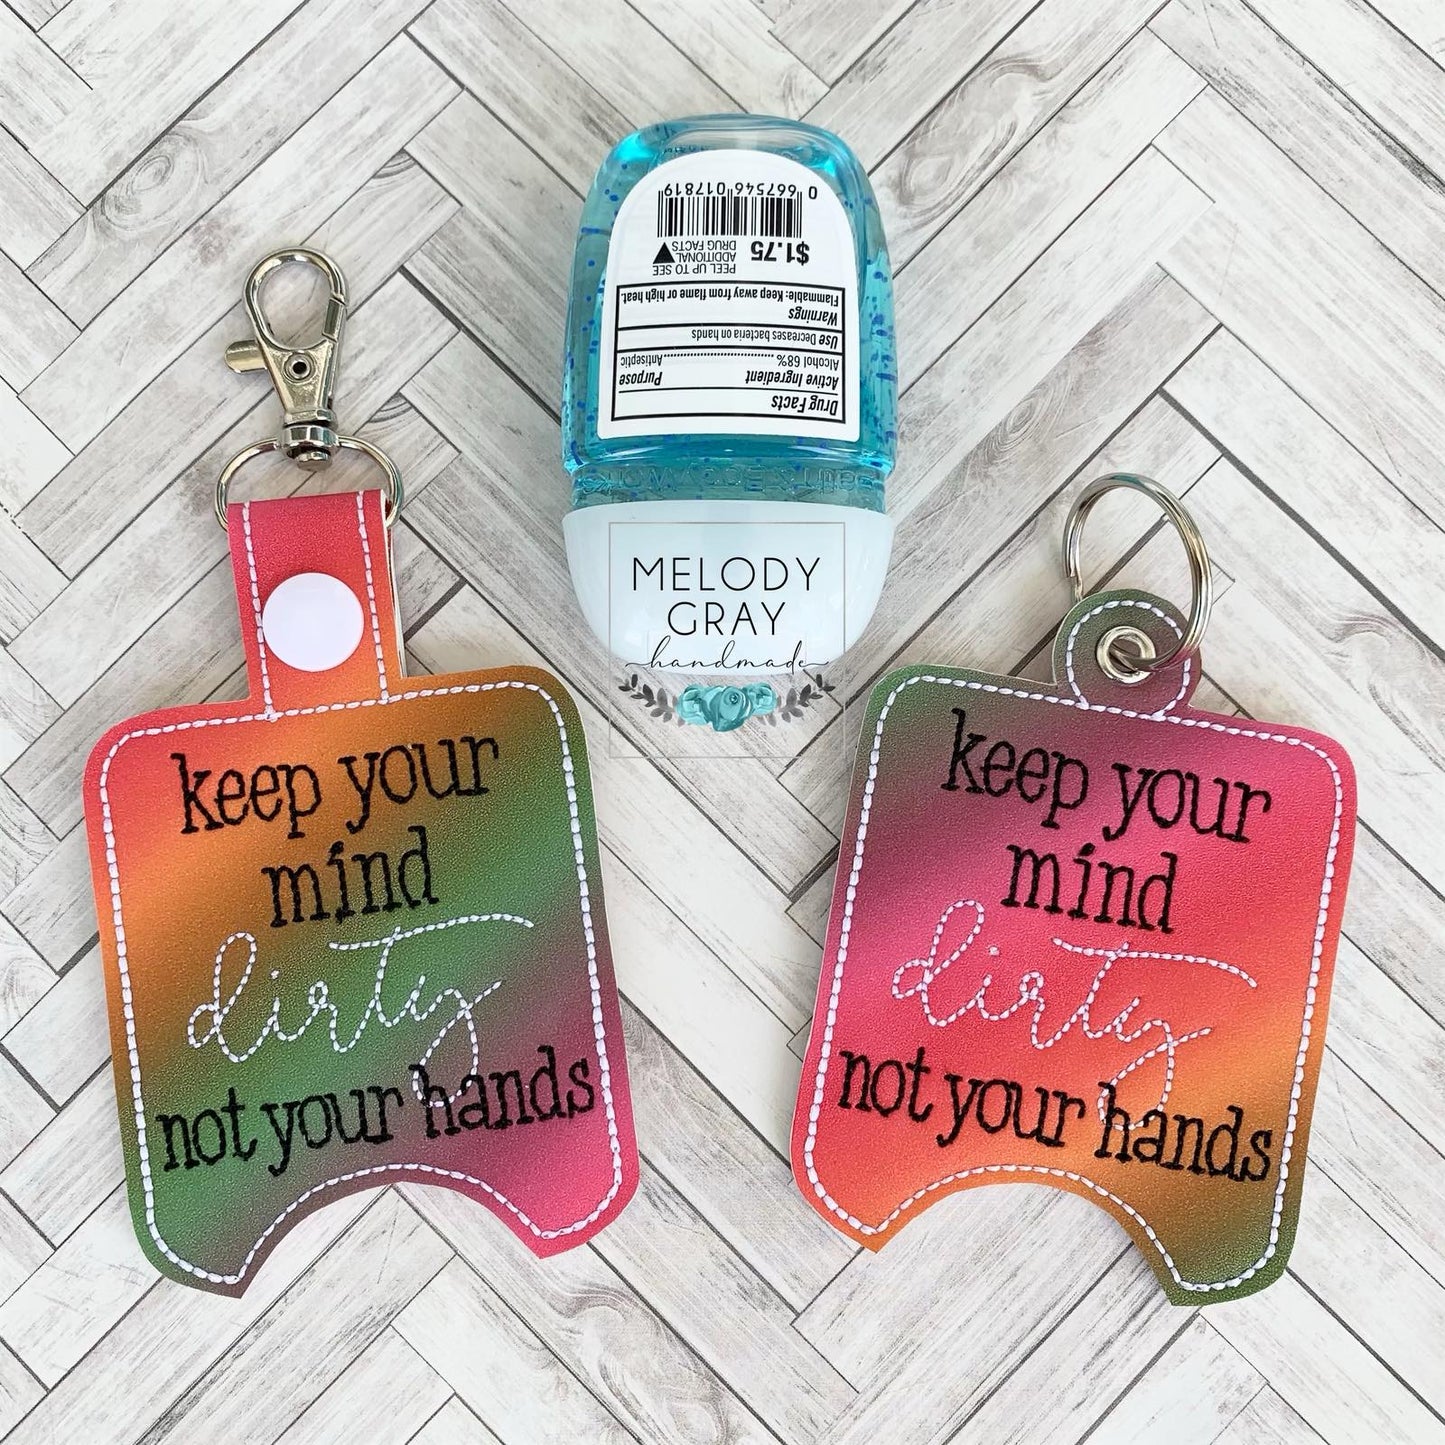 Keep Your Mind Dirty Sanitizer Holders - DIGITAL Embroidery DESIGN